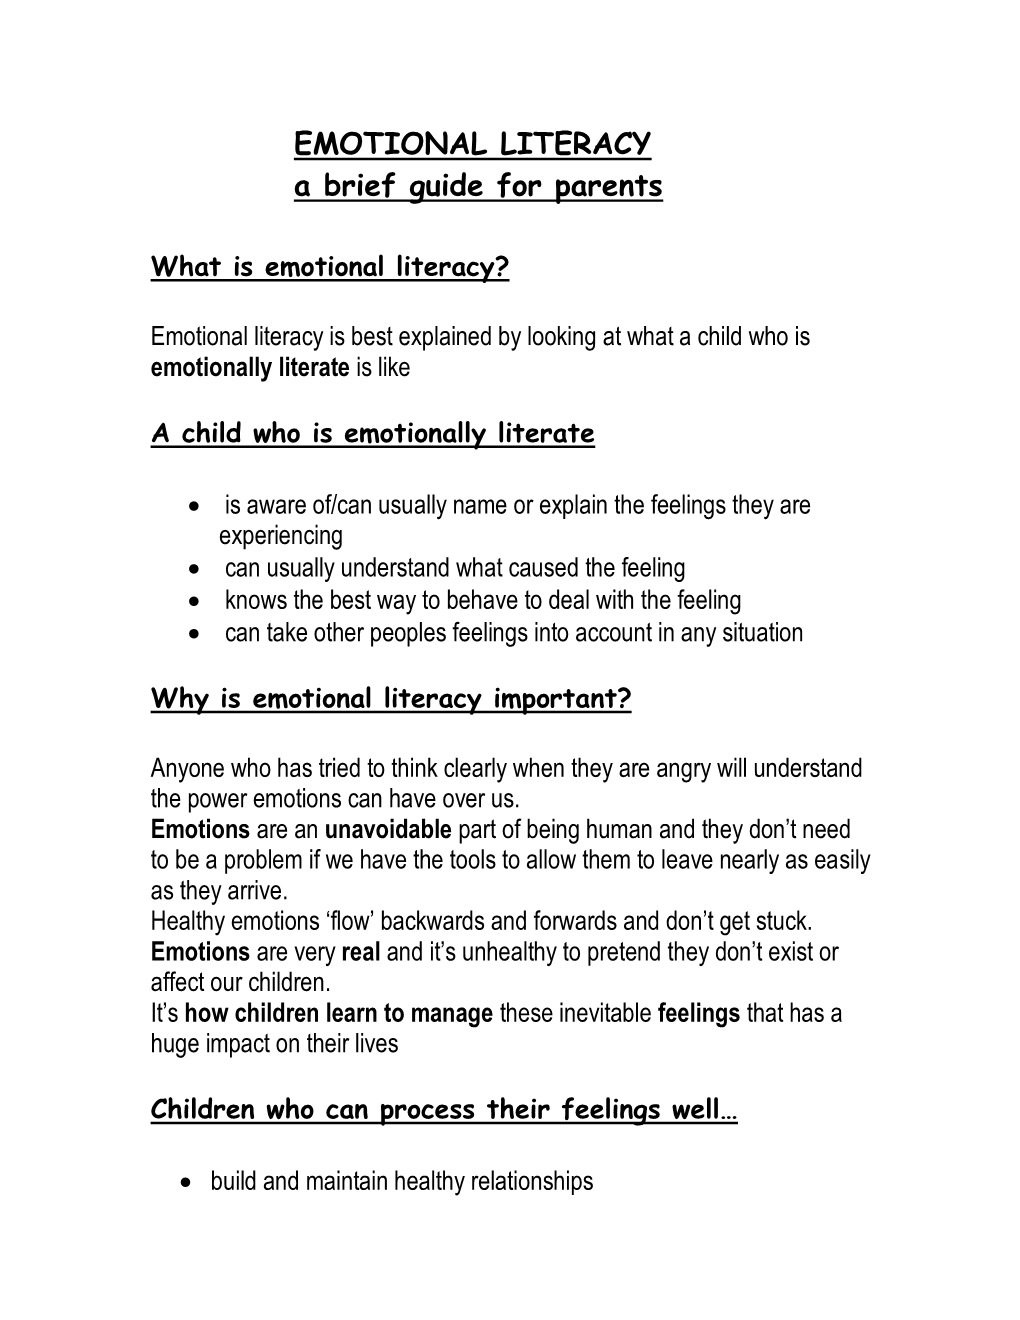 Emotional Literacy – a Brief Guide for Parents